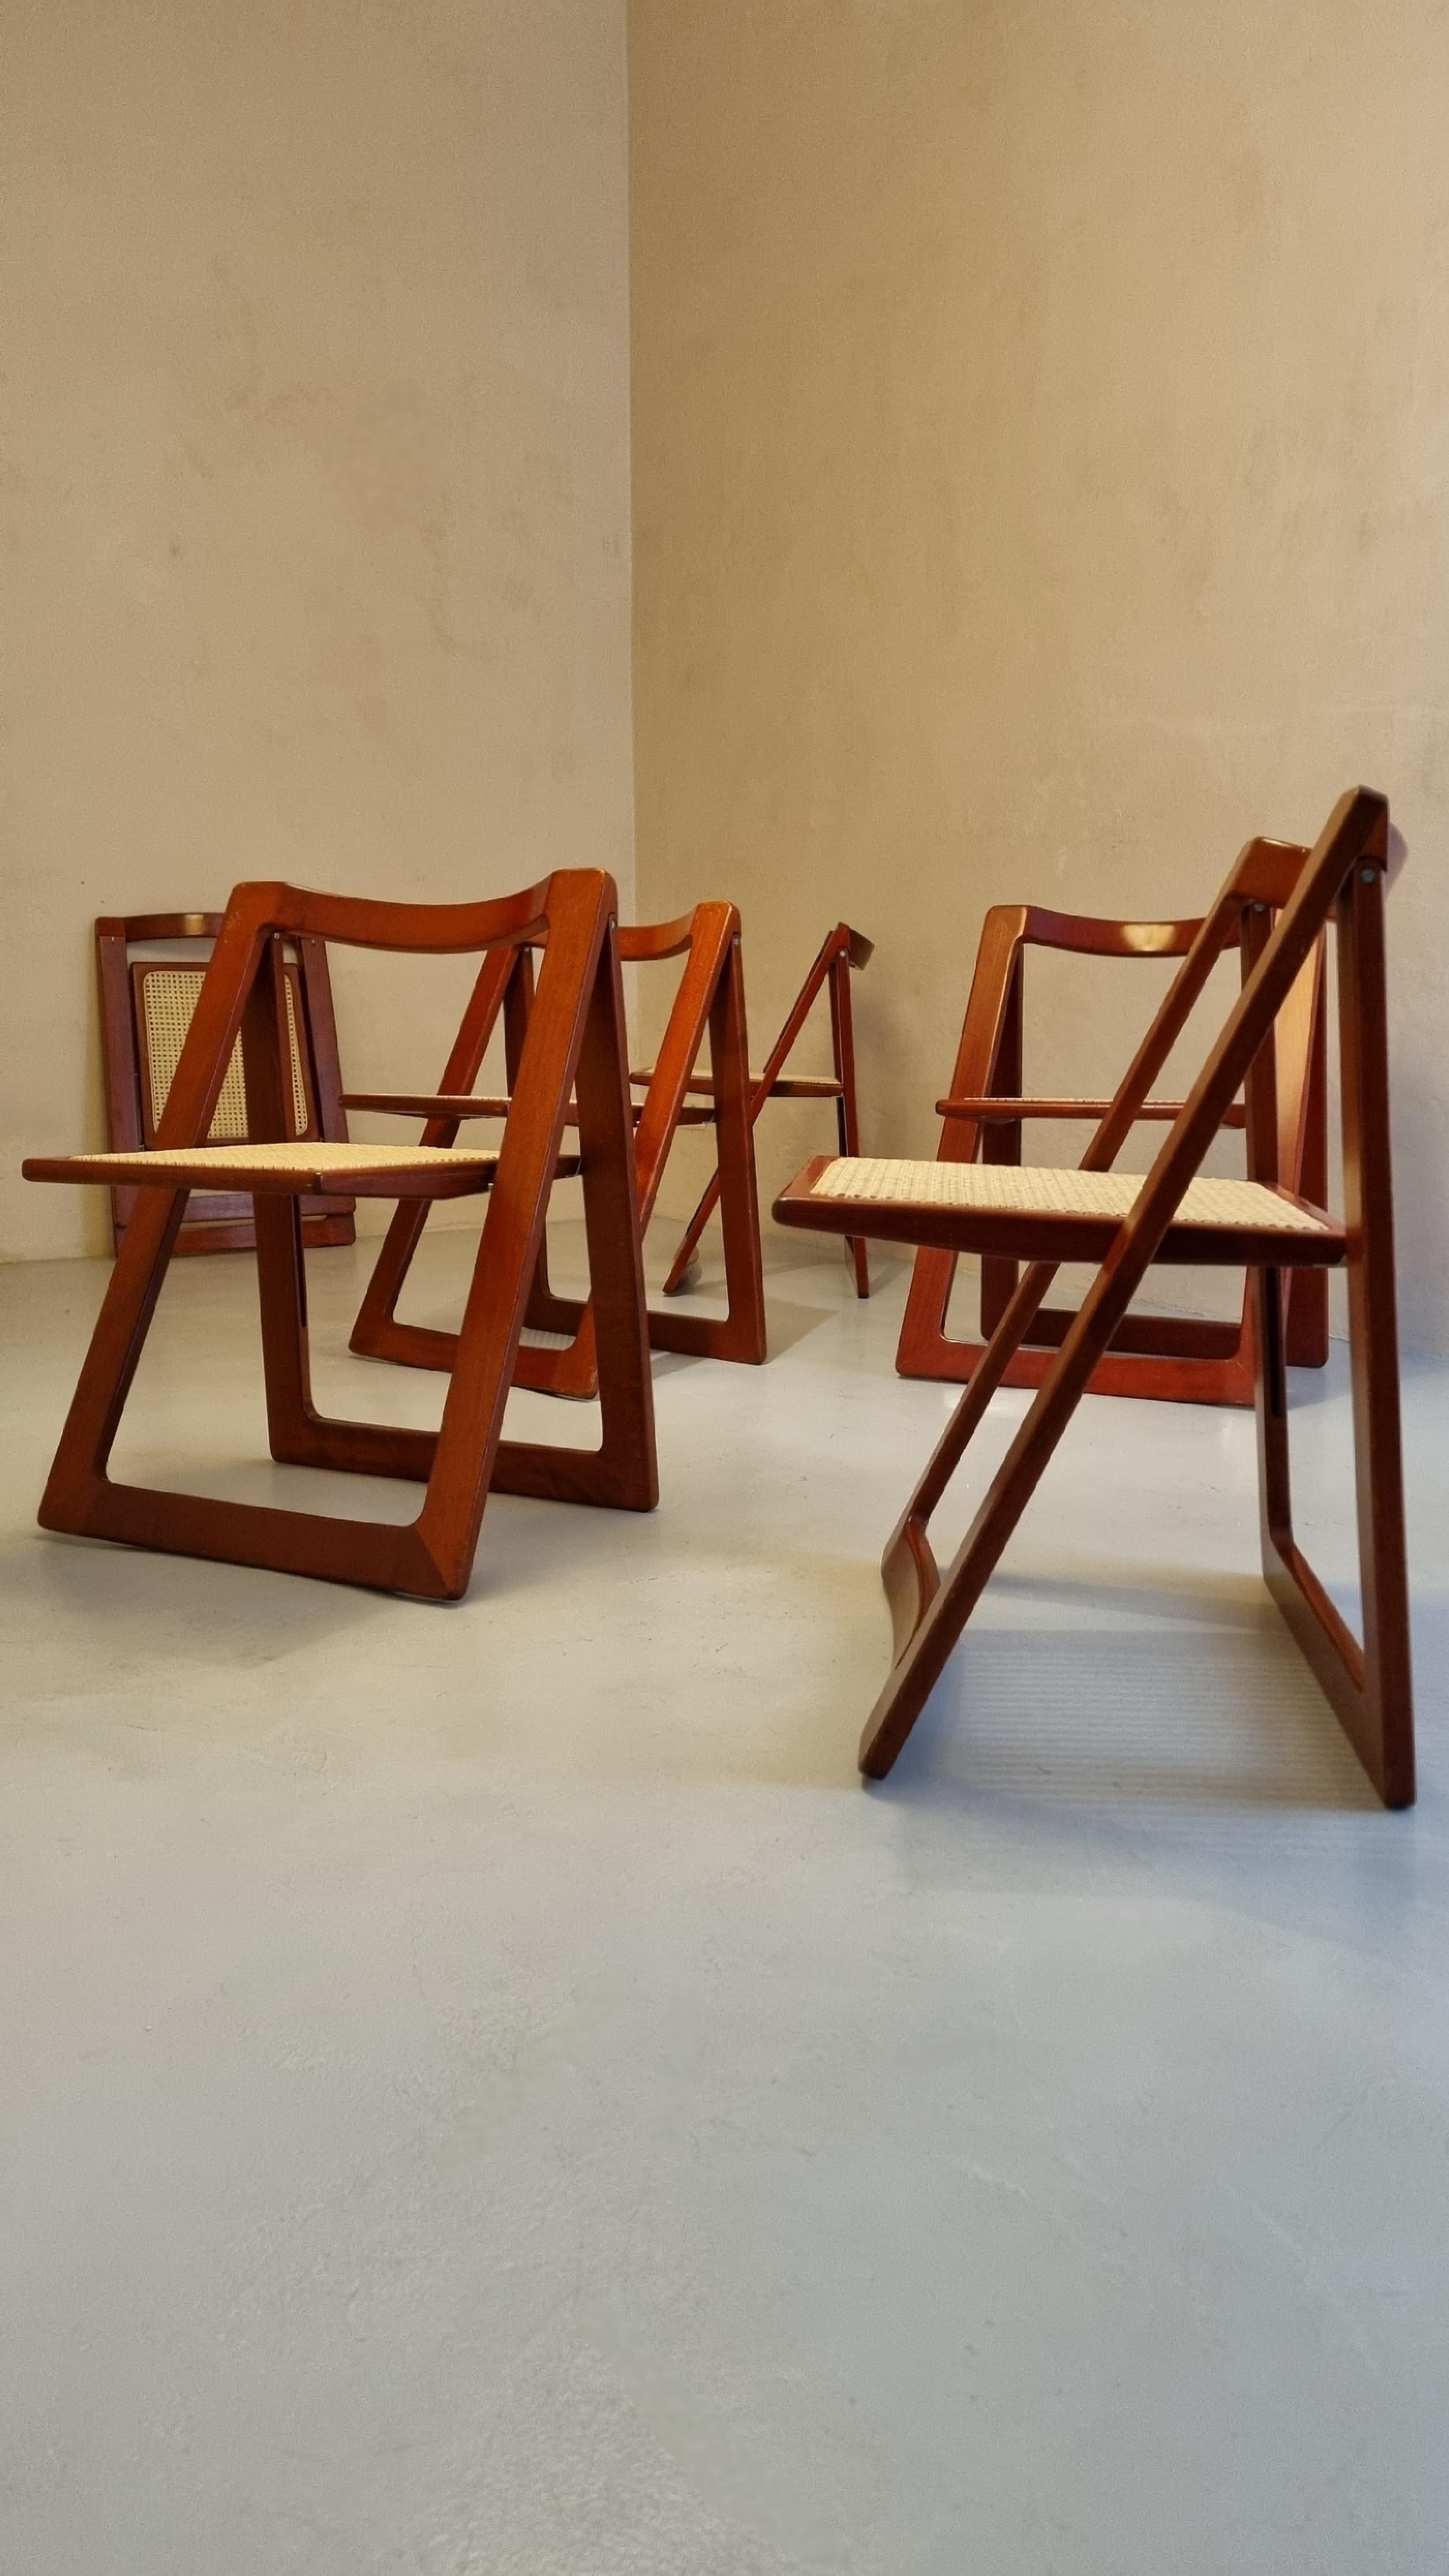 Set of 6 folding chairs designed by Aldo Jacober and Pierangela D' Aniello for Alberto Bazzani, 1966 Italy.
Lacquered wood, vienna straw. Excellent condition, seats restored.
Bibliography : Domus 443 (october 1966) p. 42
Giuliana Gramigna, Design